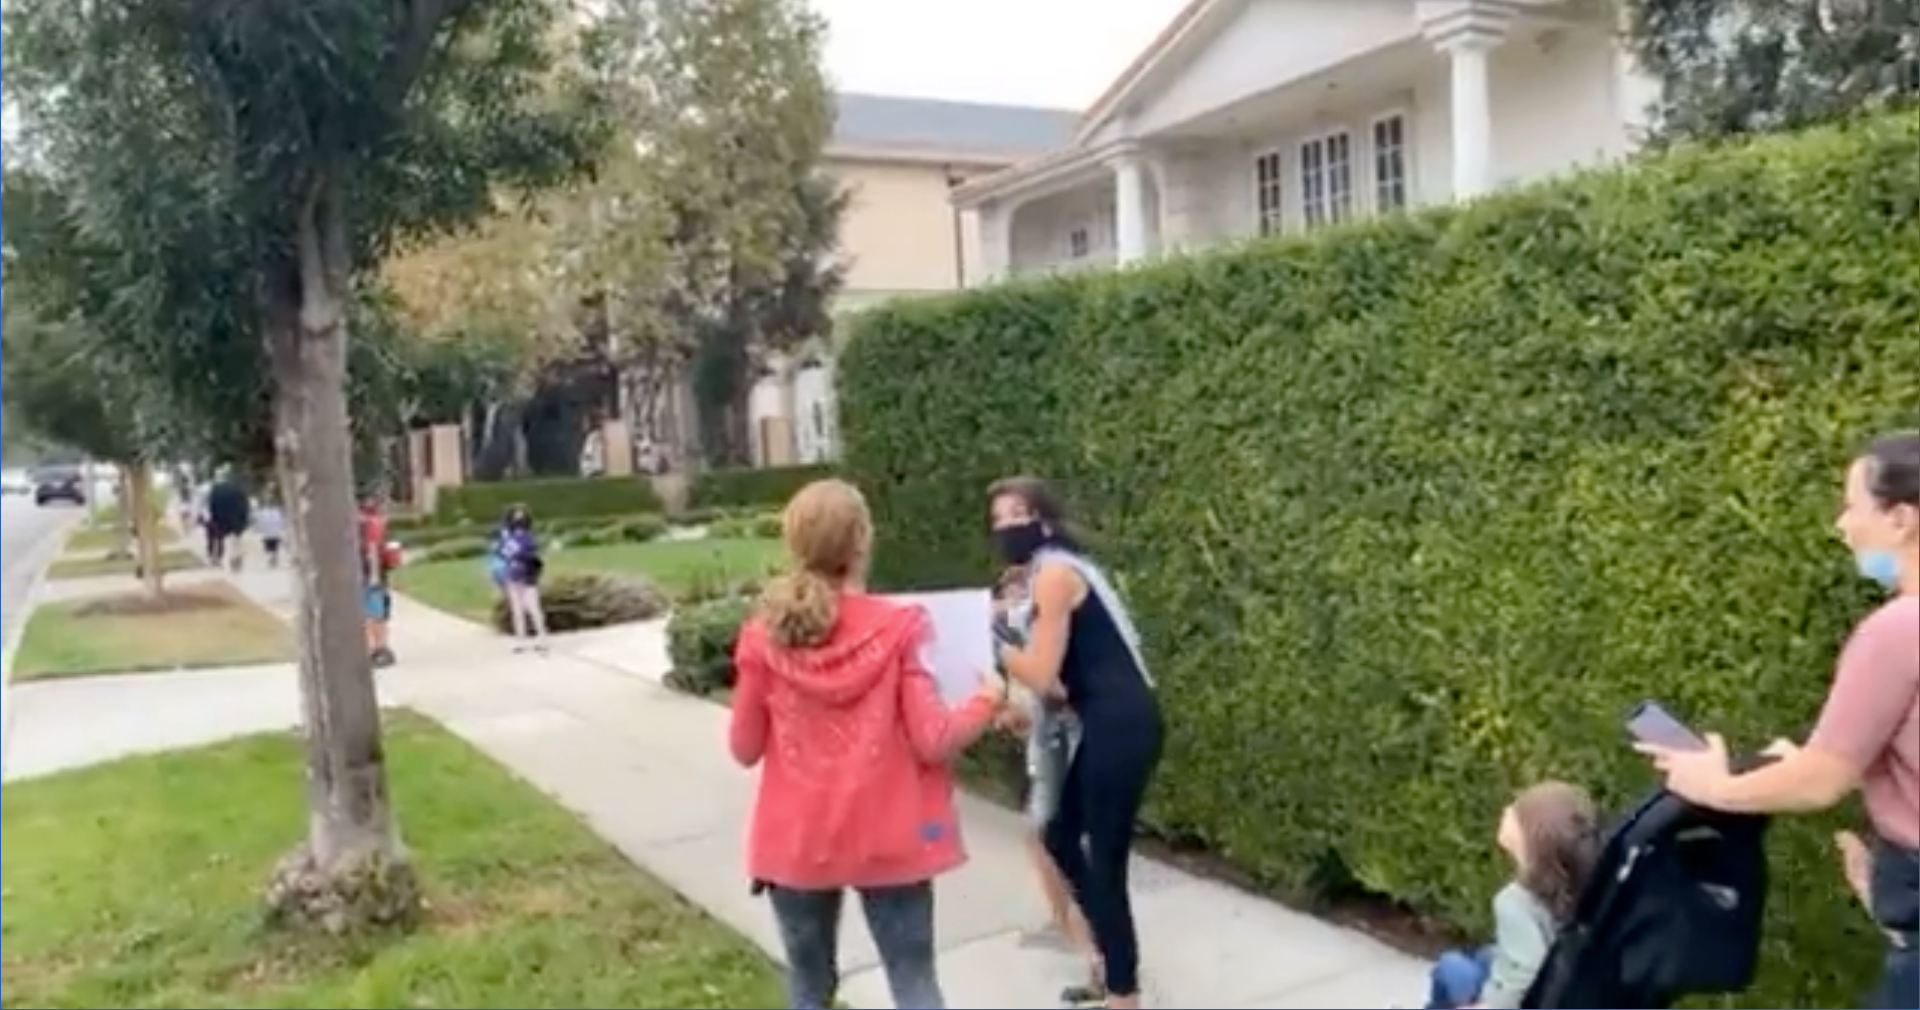 Protesters confront parents walking their kids to primary school in an upscale neighbourhood of Los Angeles.